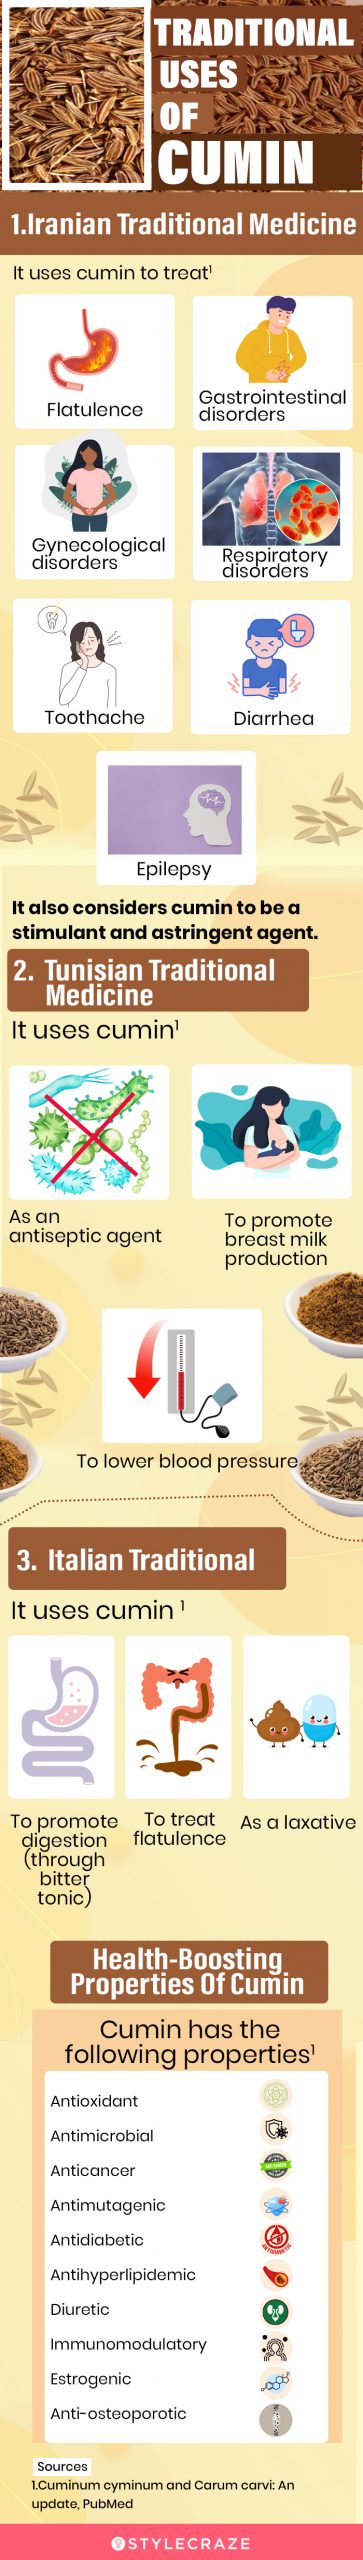 traditional uses of cumin [infographic]